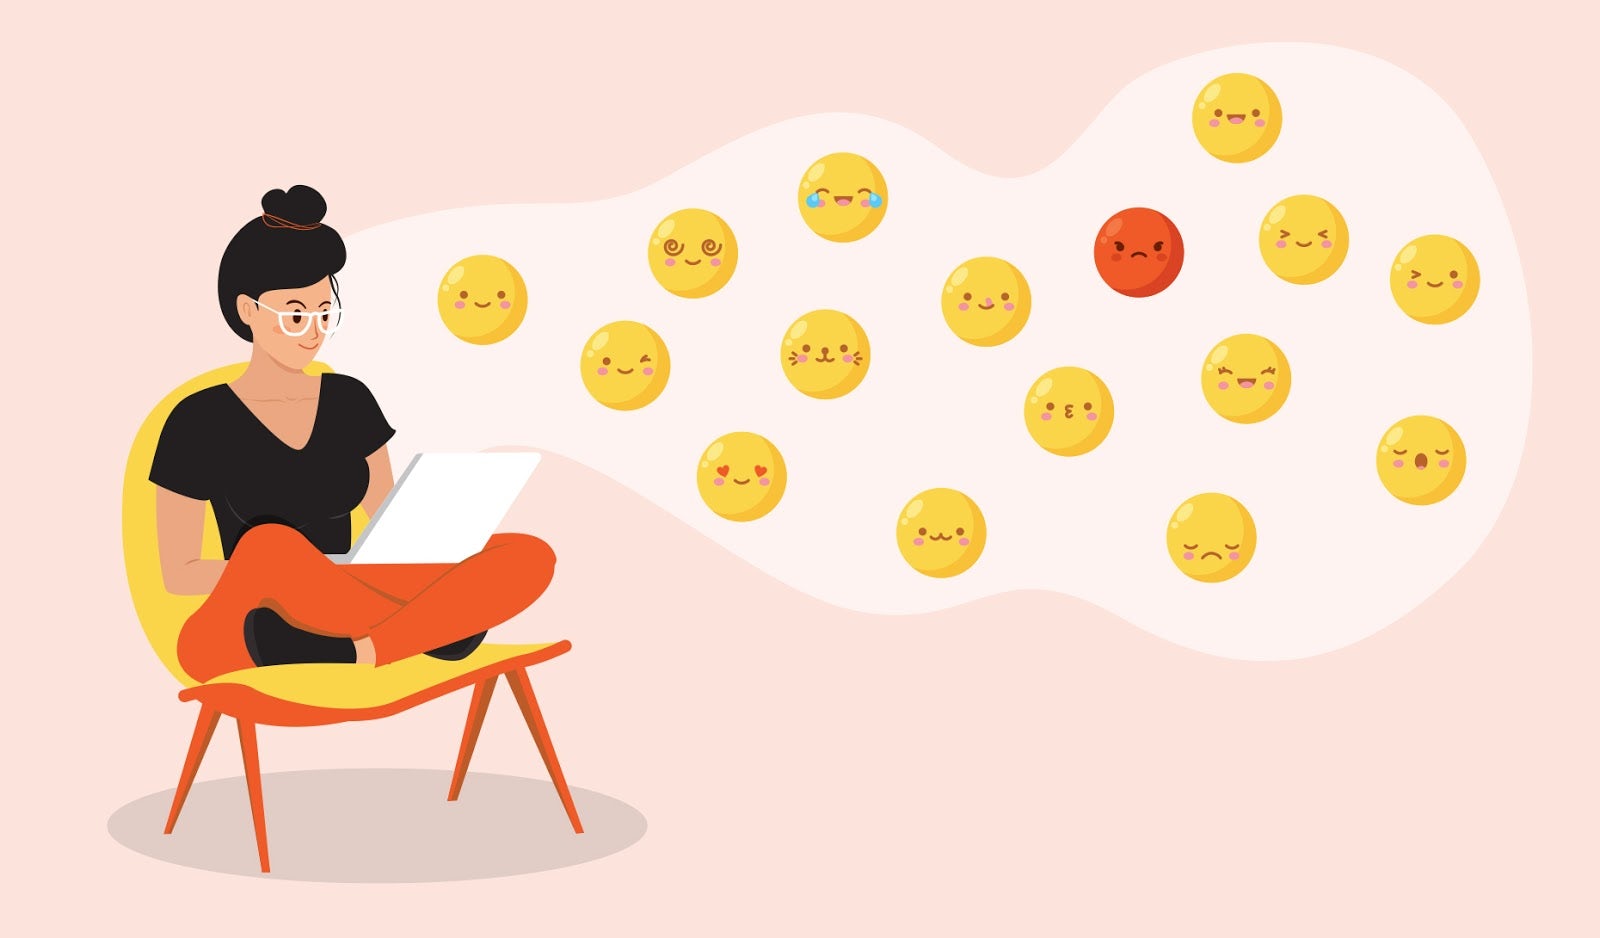 What Are Emojis and Their Meanings 2023? Let's Learn Together What